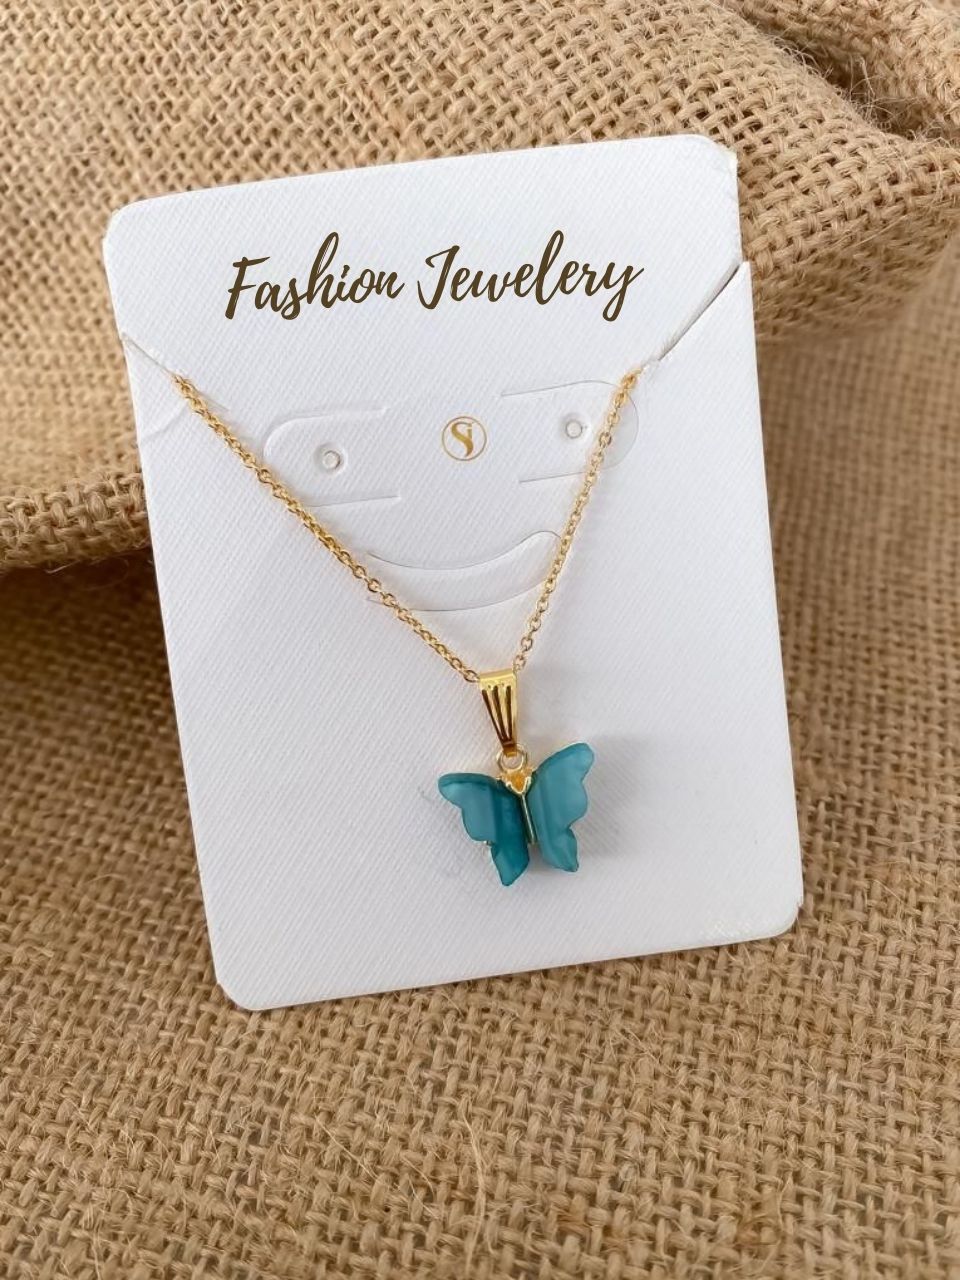 Shining Butterfly Pendant Necklace